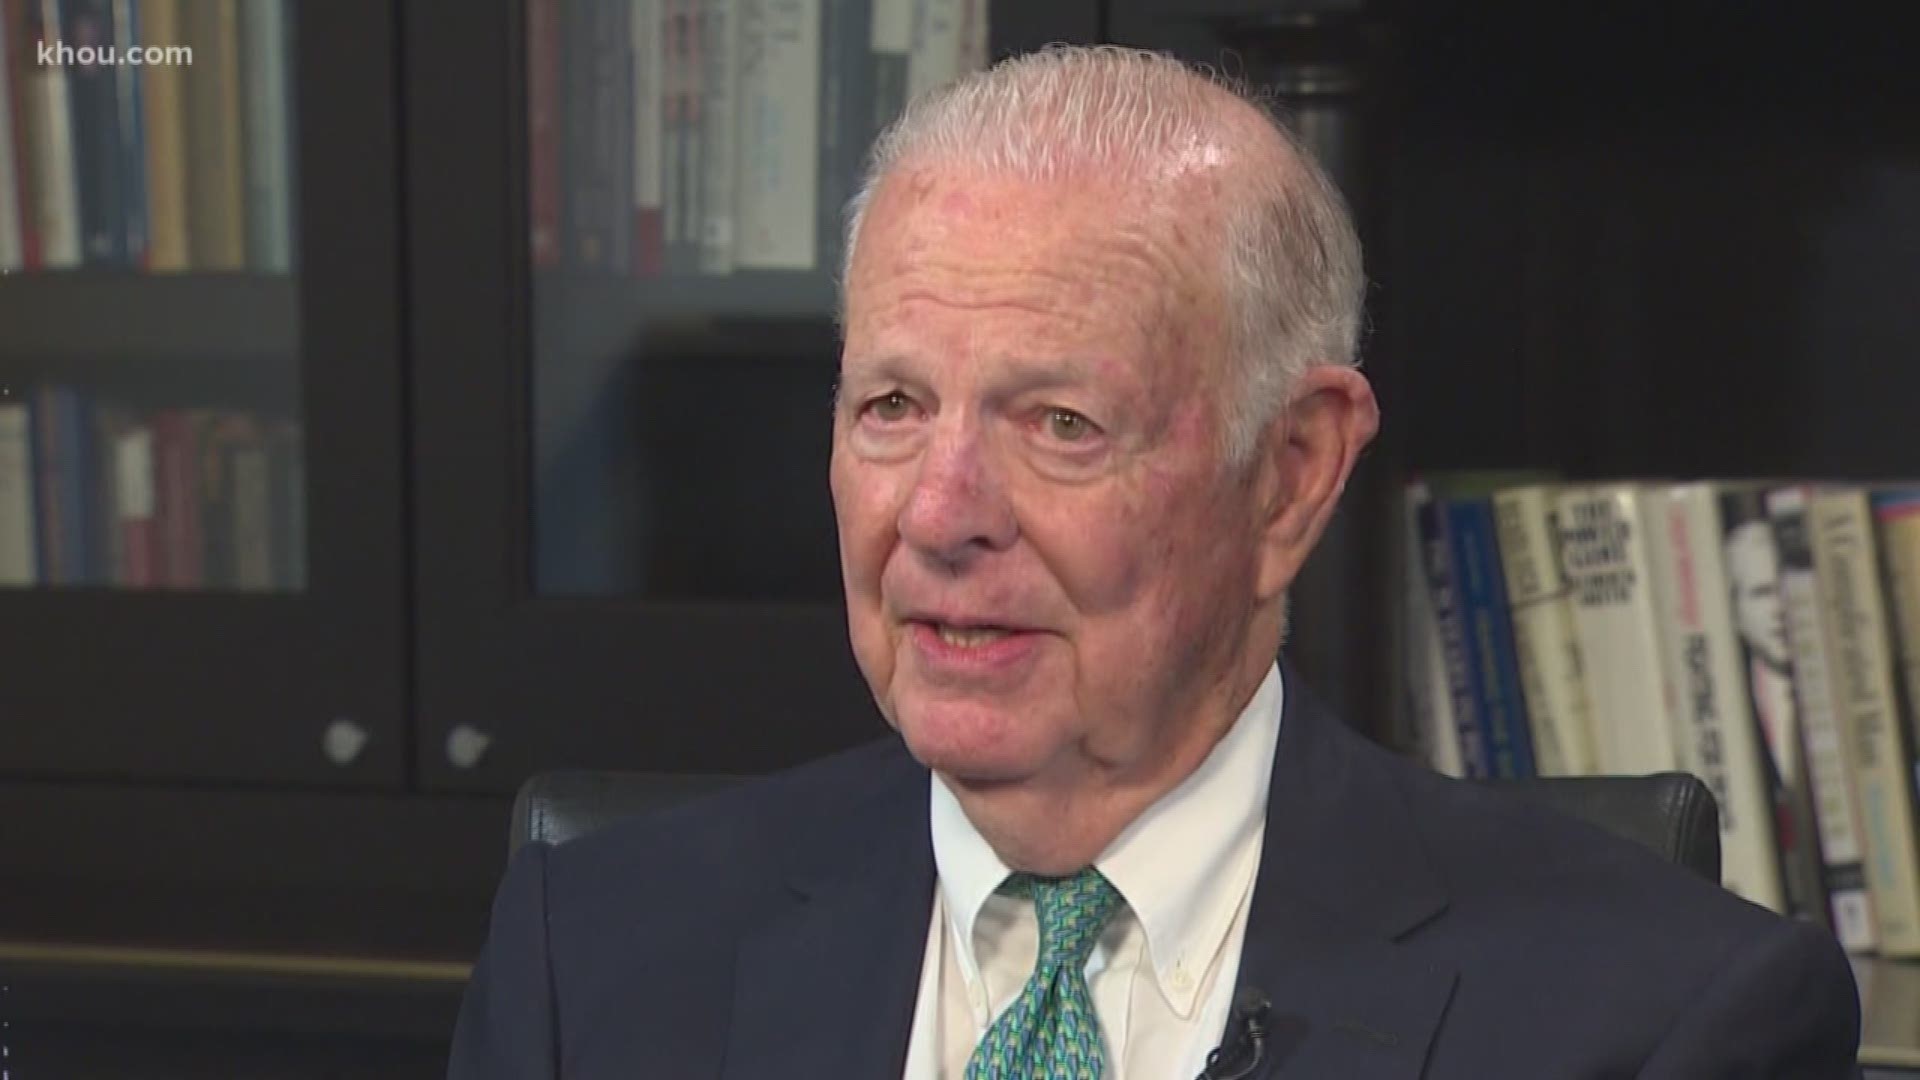 Legendary Houston political insider James Baker condemns the current political environment. Baker sat down with KHOU 11 News to share his thoughts as Rice University marks the 25th anniversary of the Baker Institute for Public Policy.